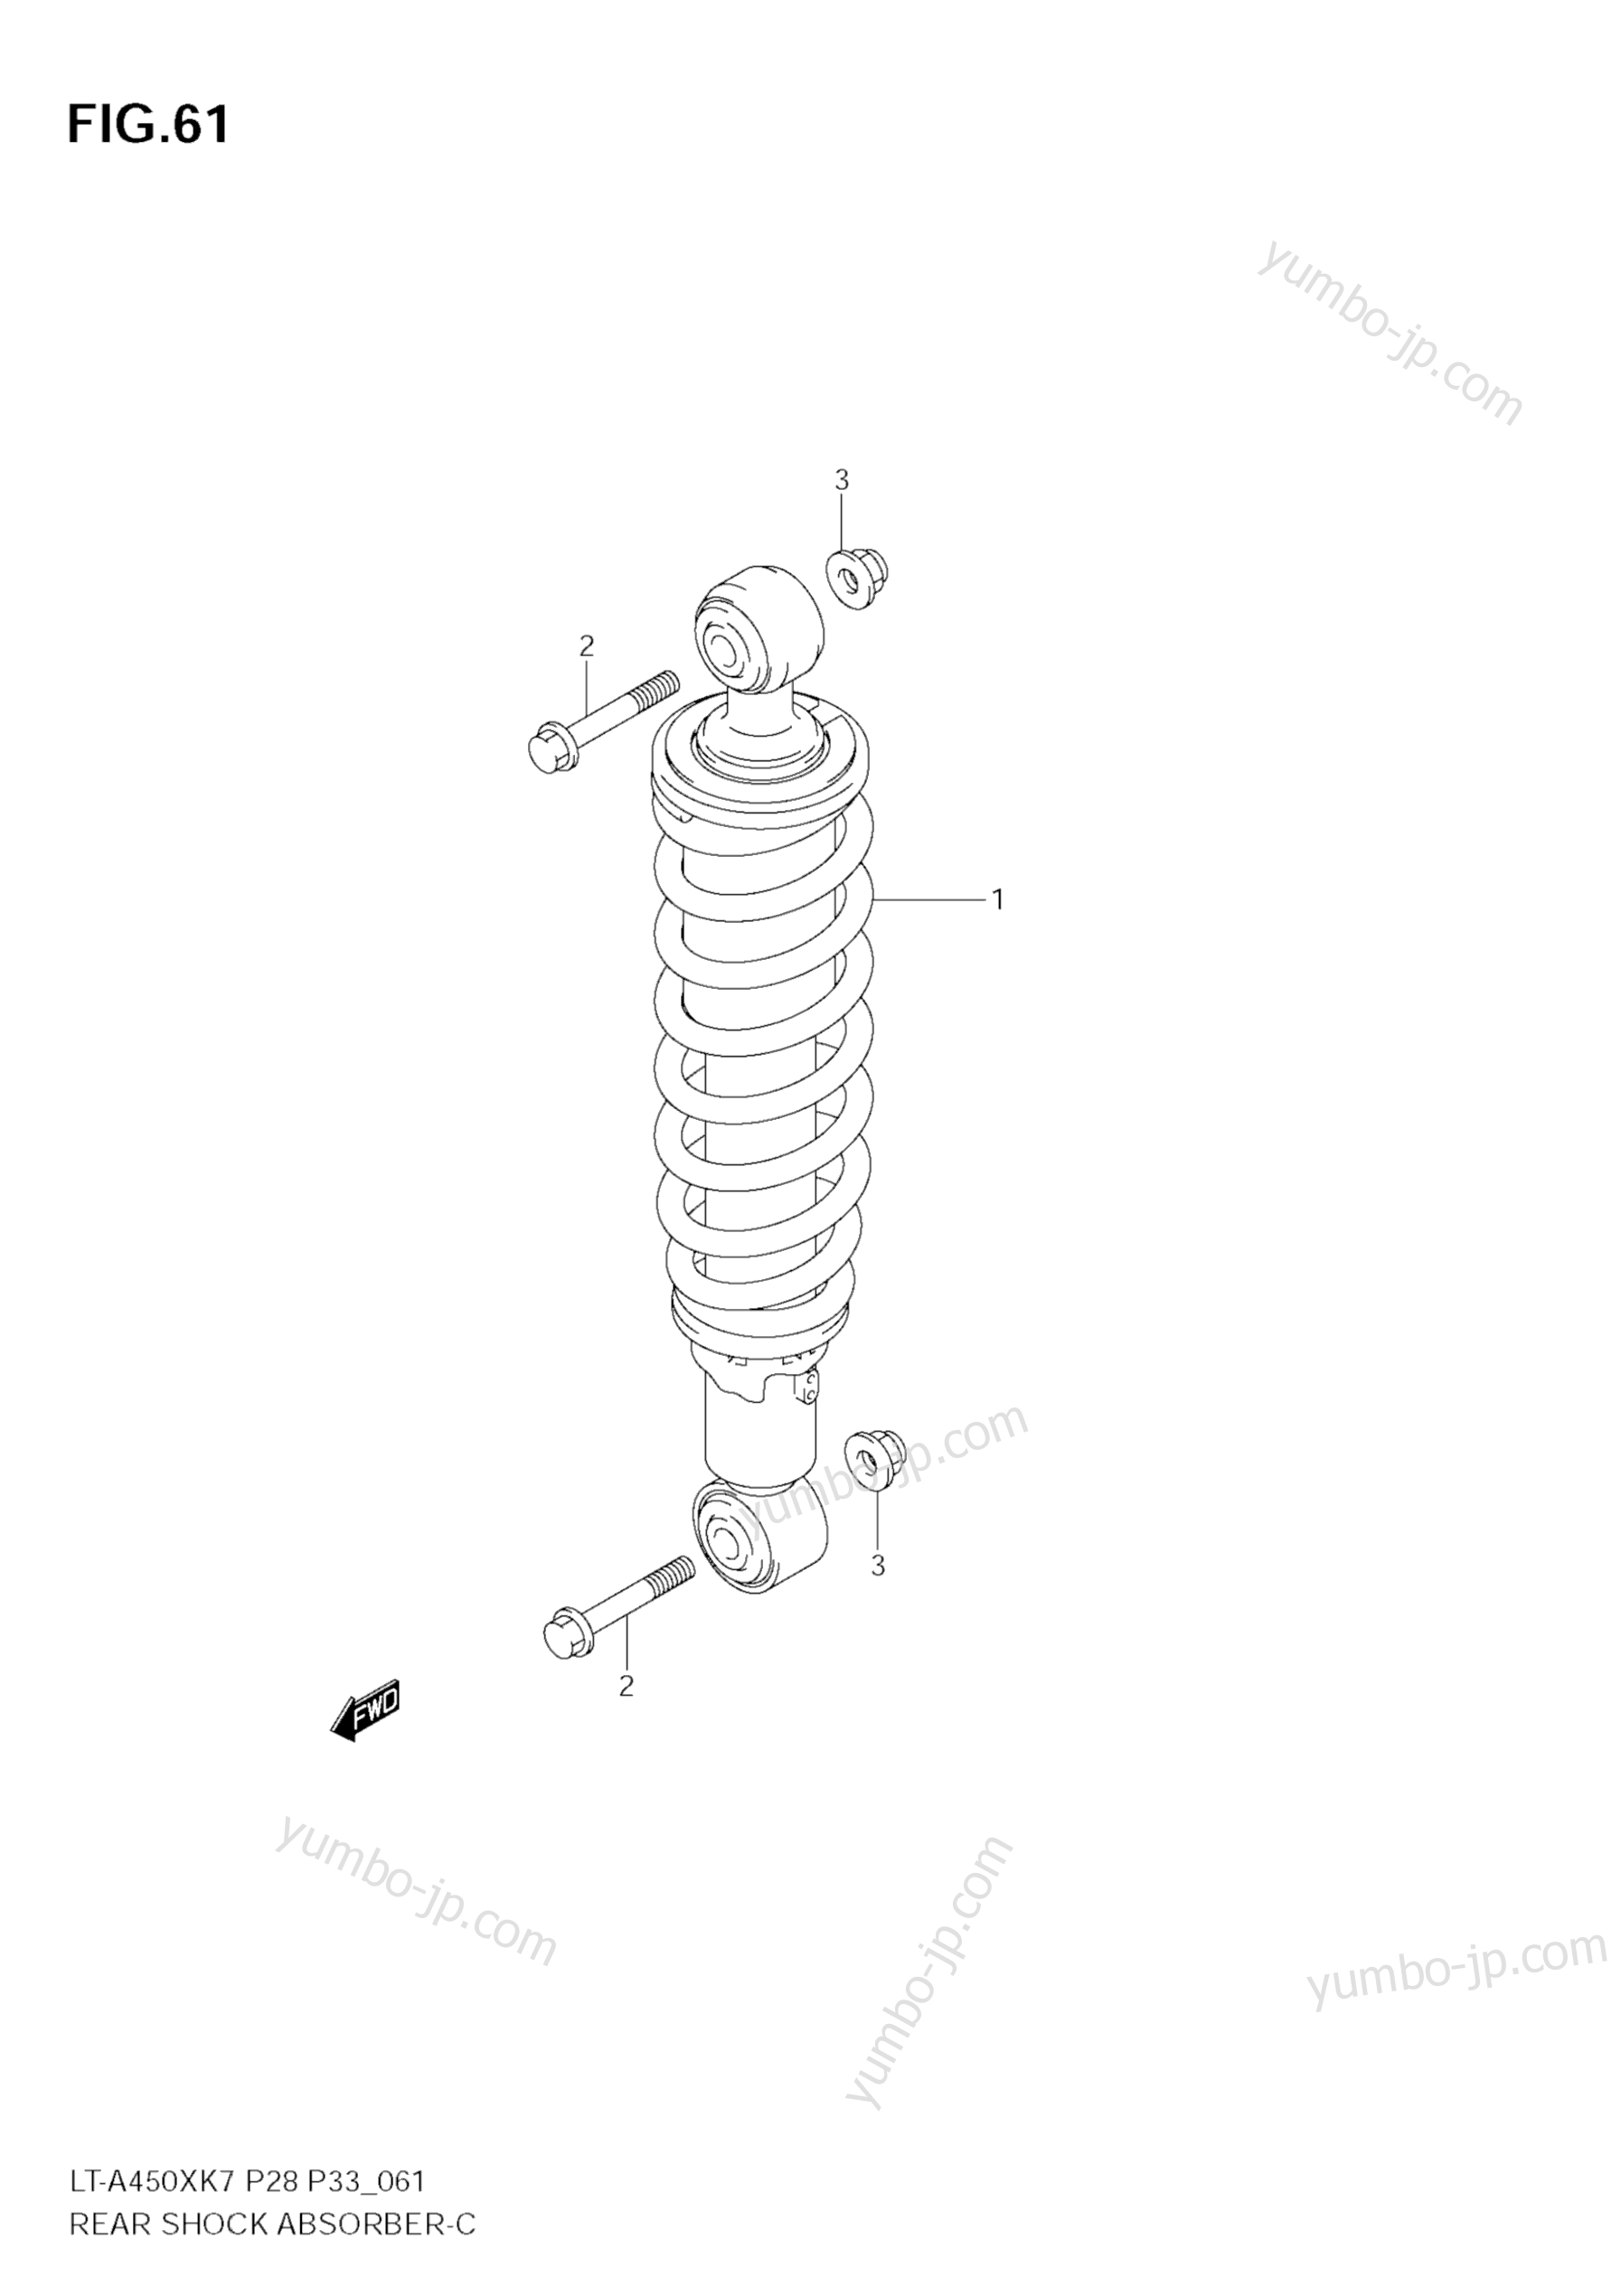 REAR SHOCK ABSORBER for ATVs SUZUKI KingQuad (LT-A450X) 2010 year